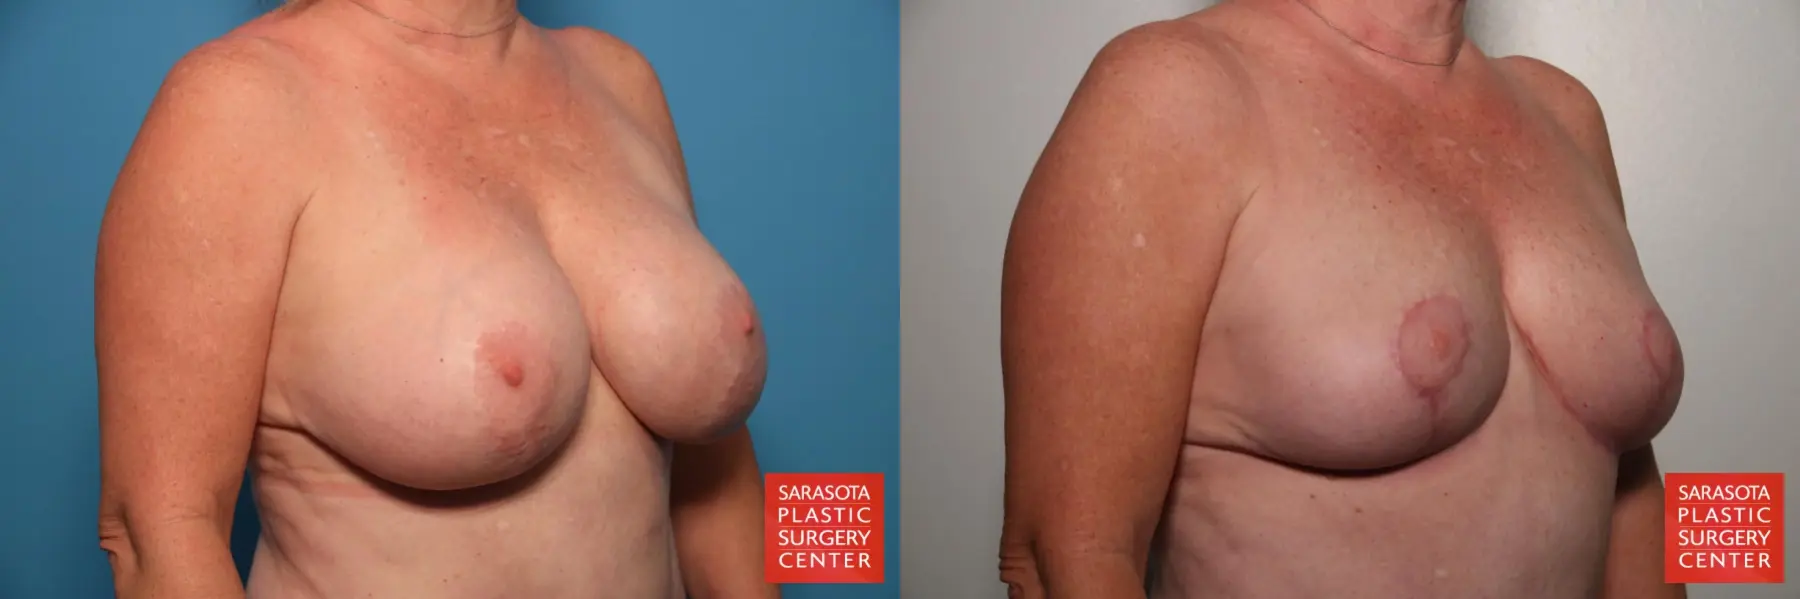 Breast Implant Removal With Lift: Patient 2 - Before and After 2